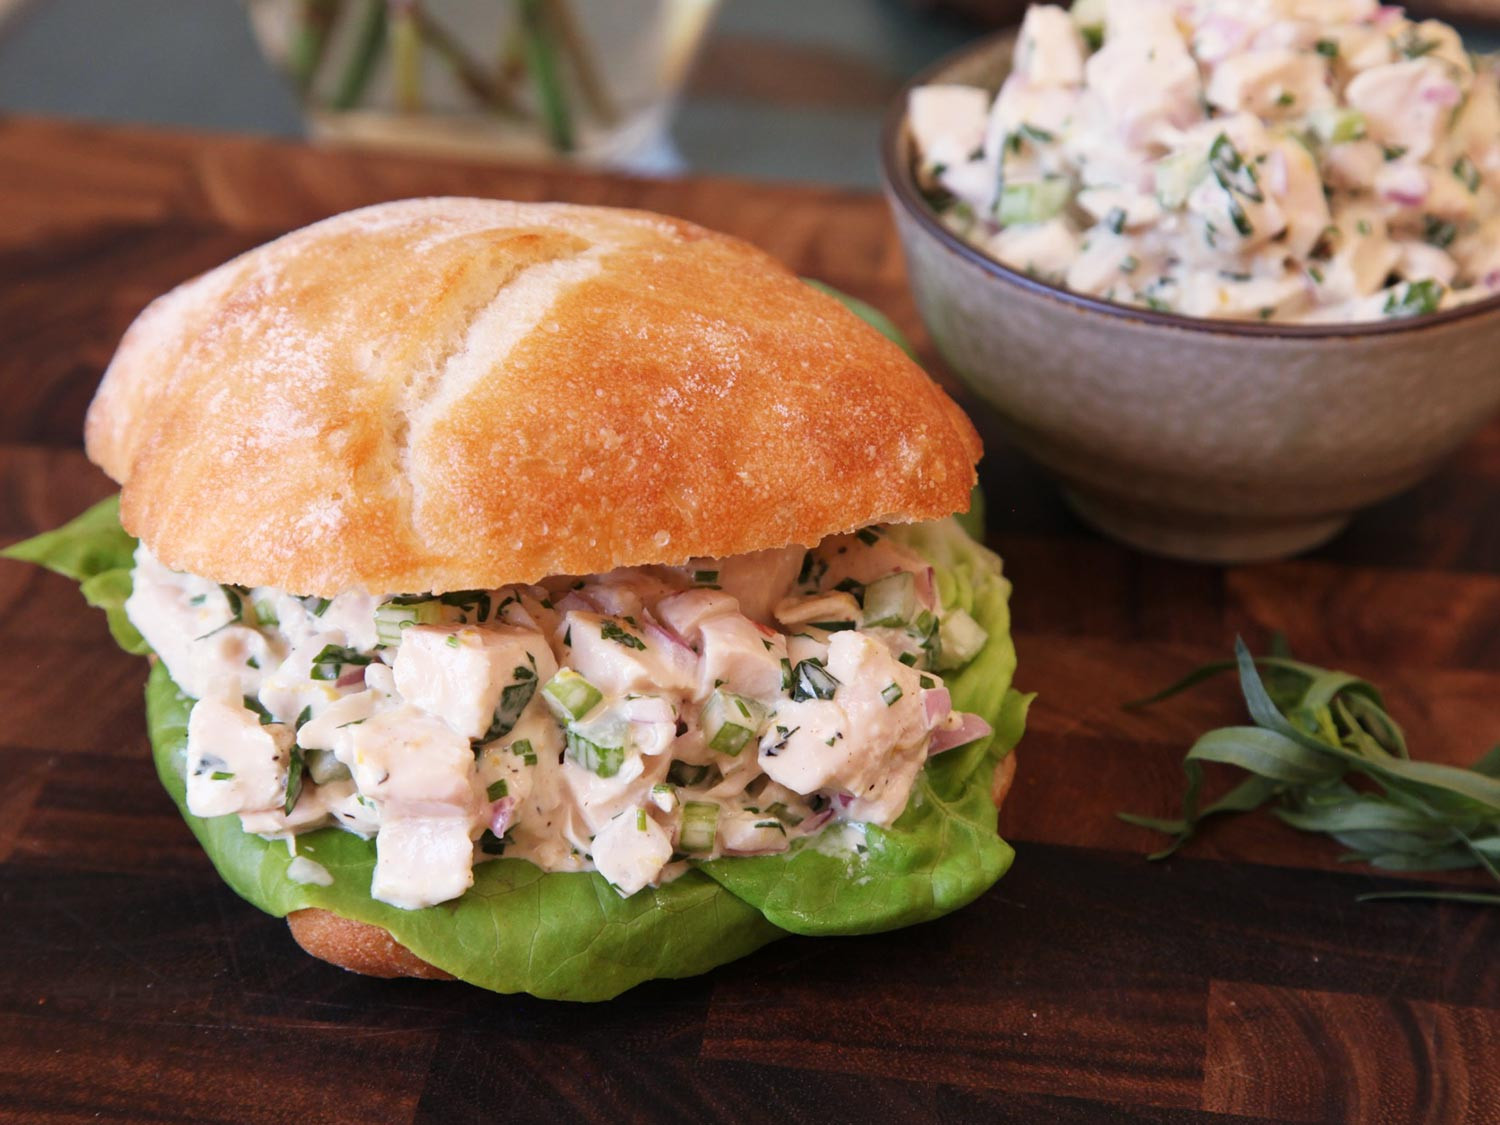 Recipes For Chicken Salad
 The Best Classic Chicken Salad Recipe